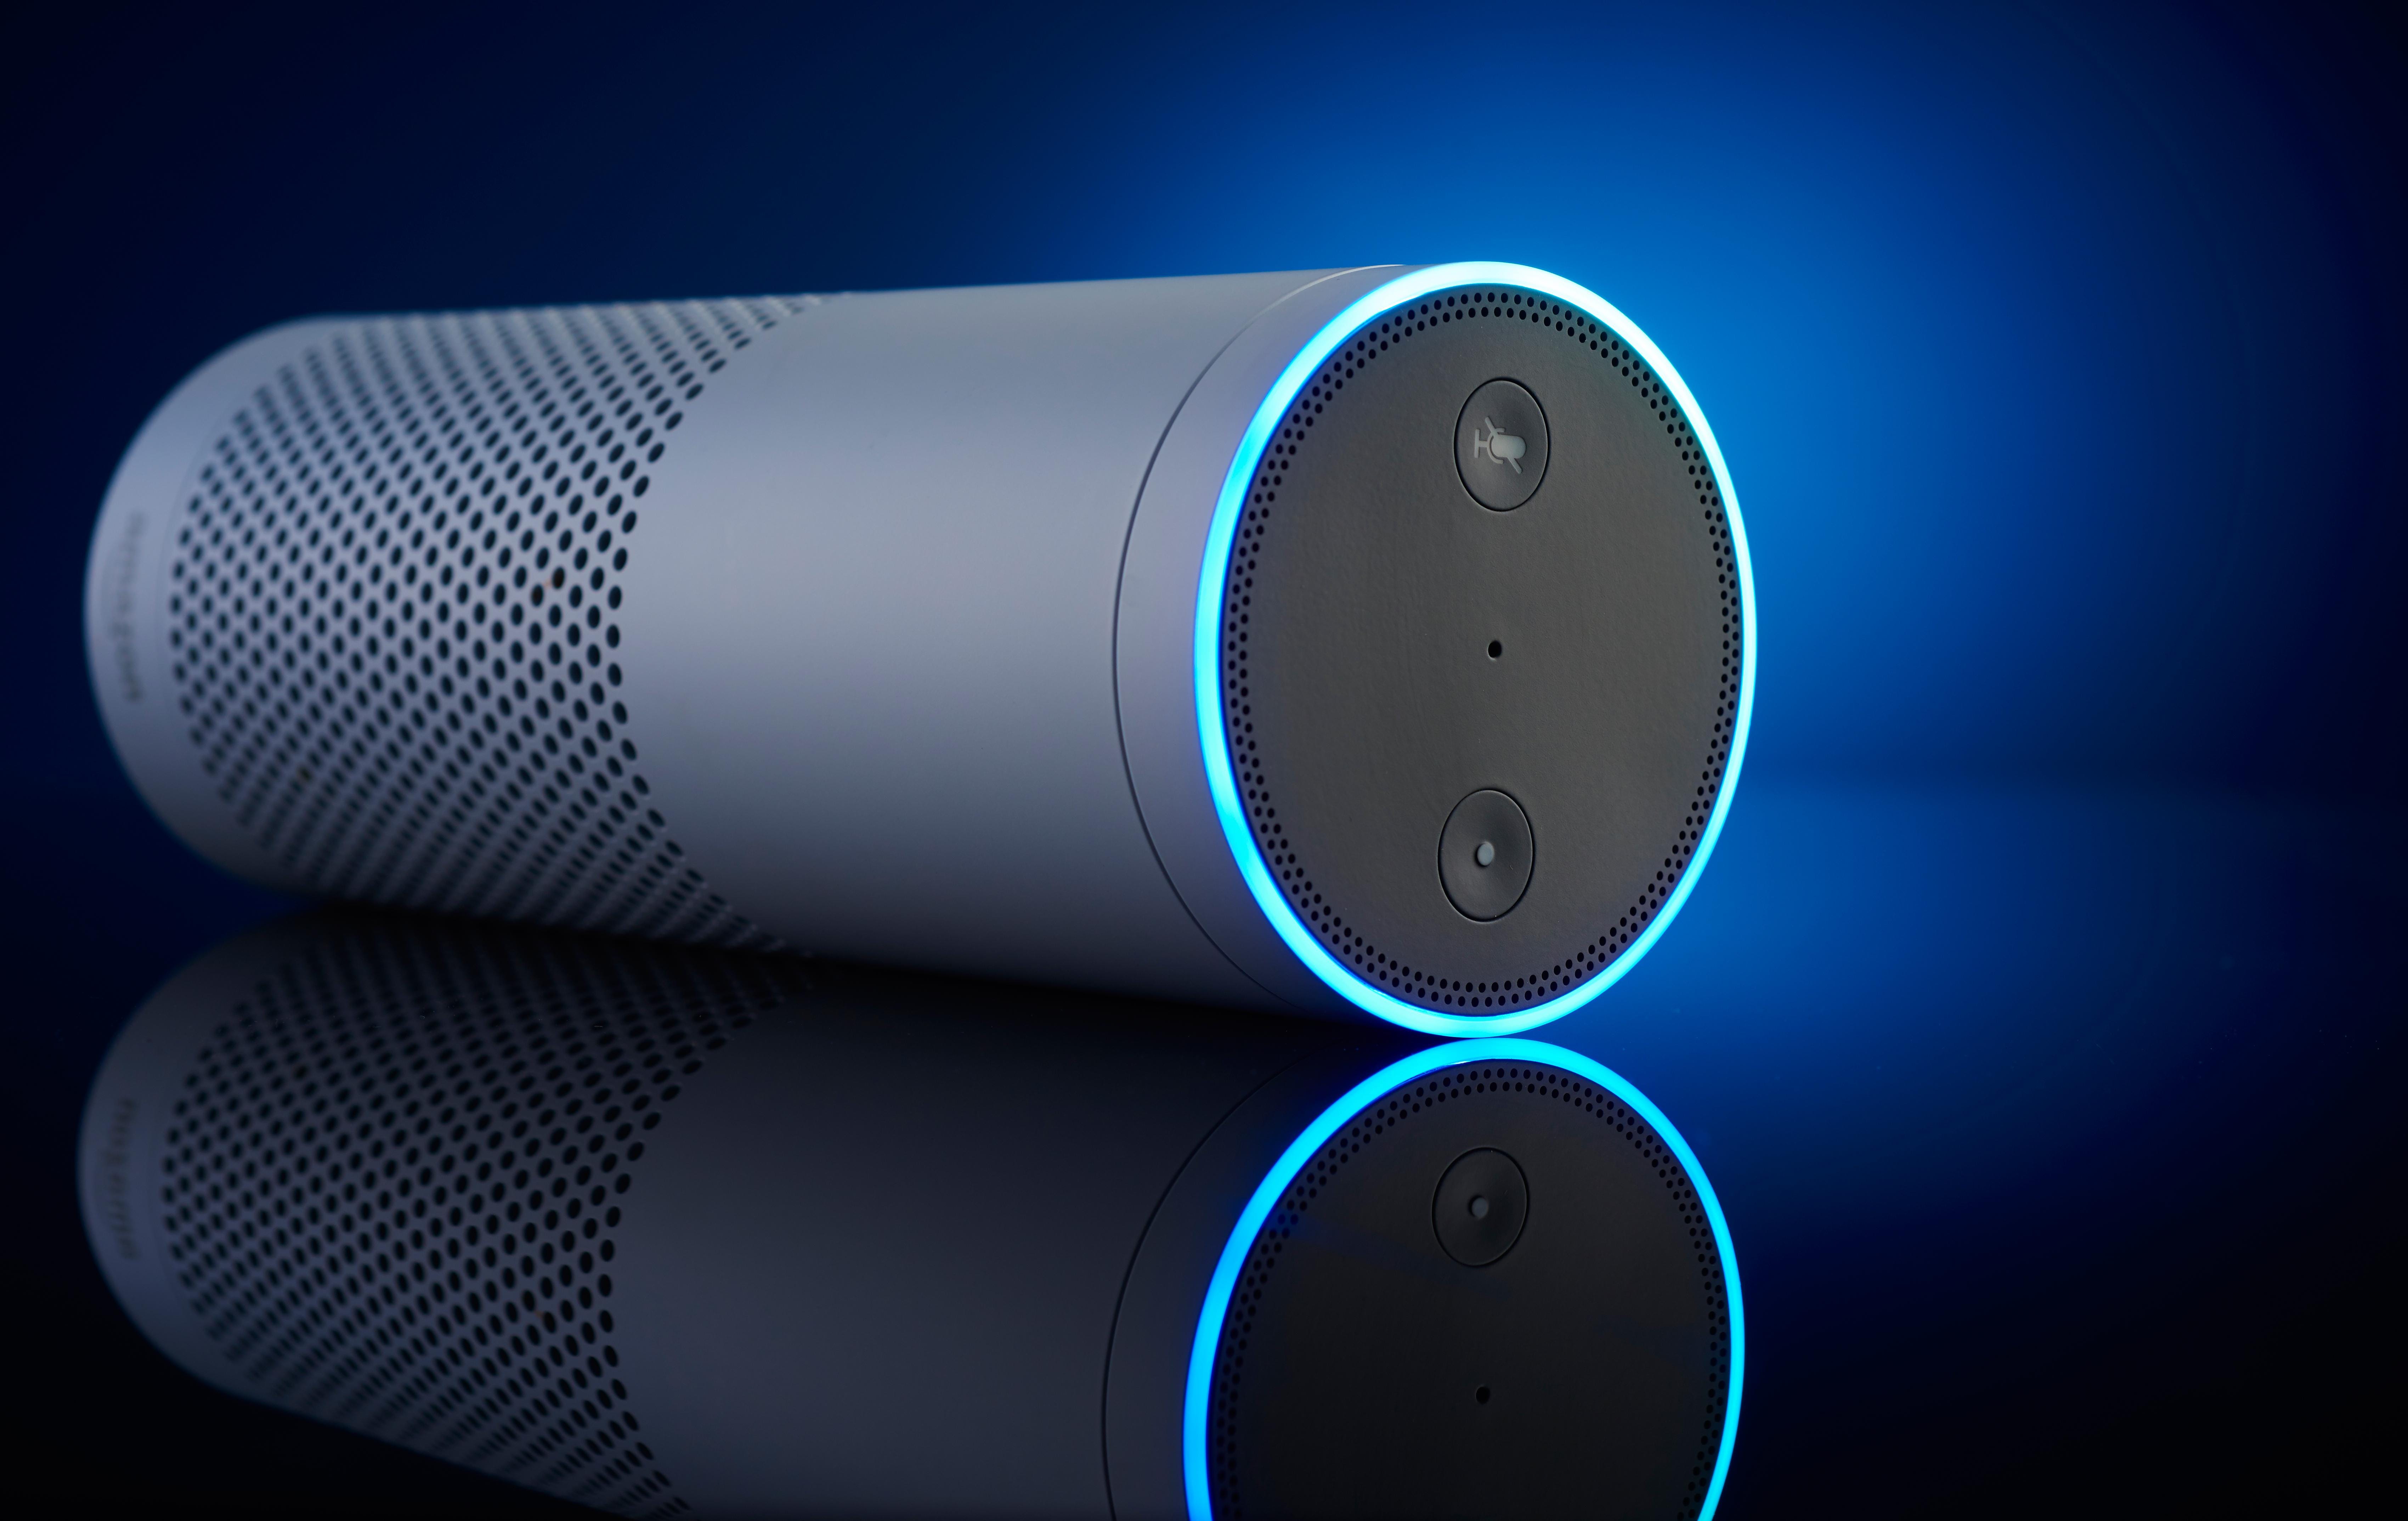 In order to better understand consumers, Alexa is utilizing self-learning methods